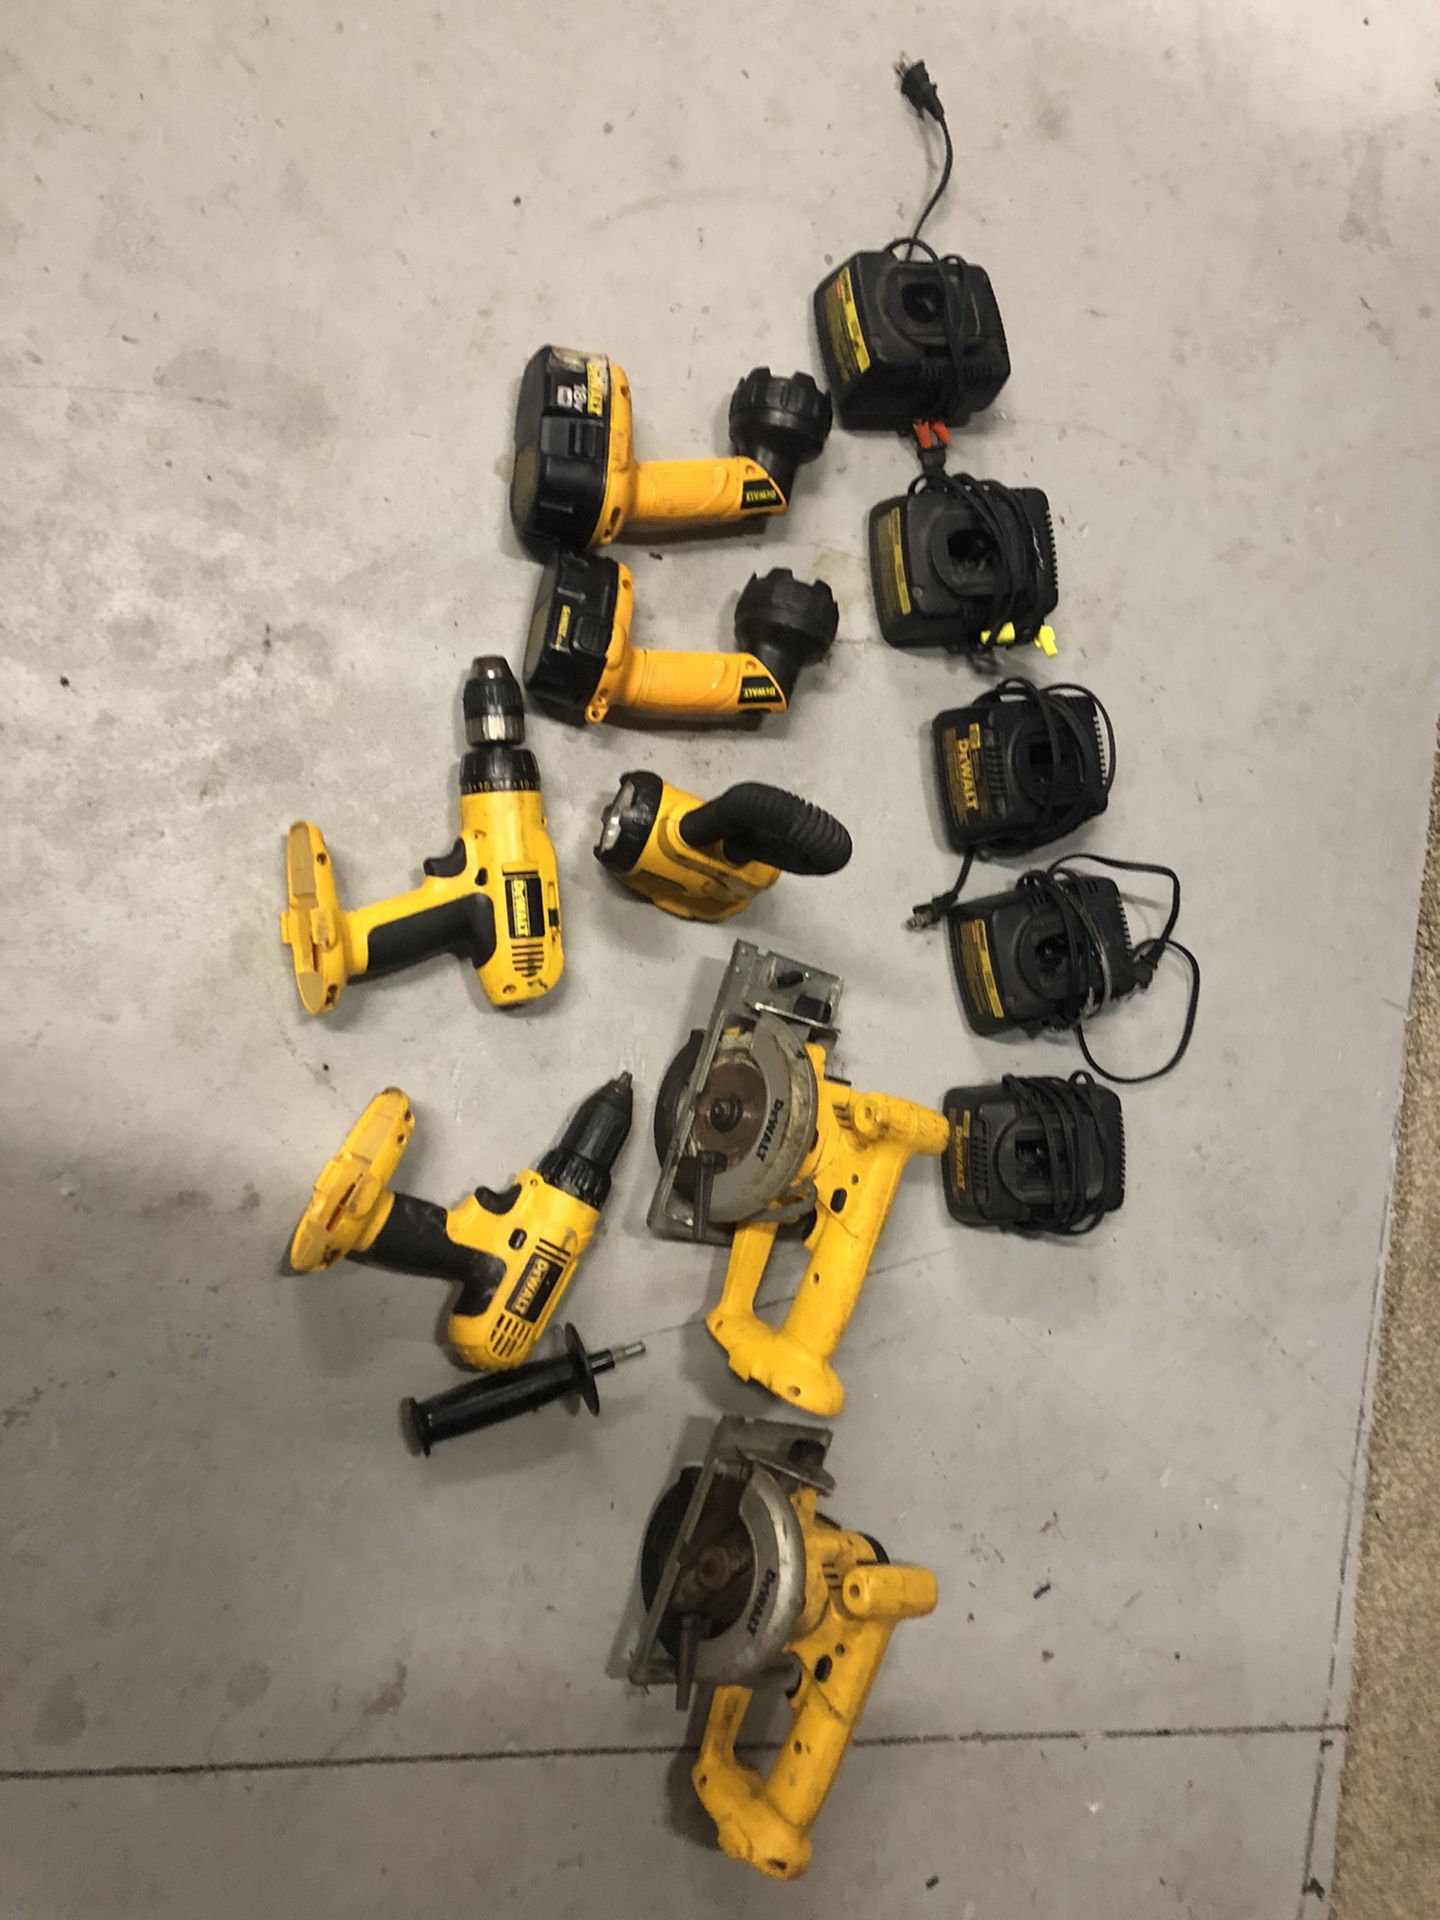 Multiple Dewalt tools and charger